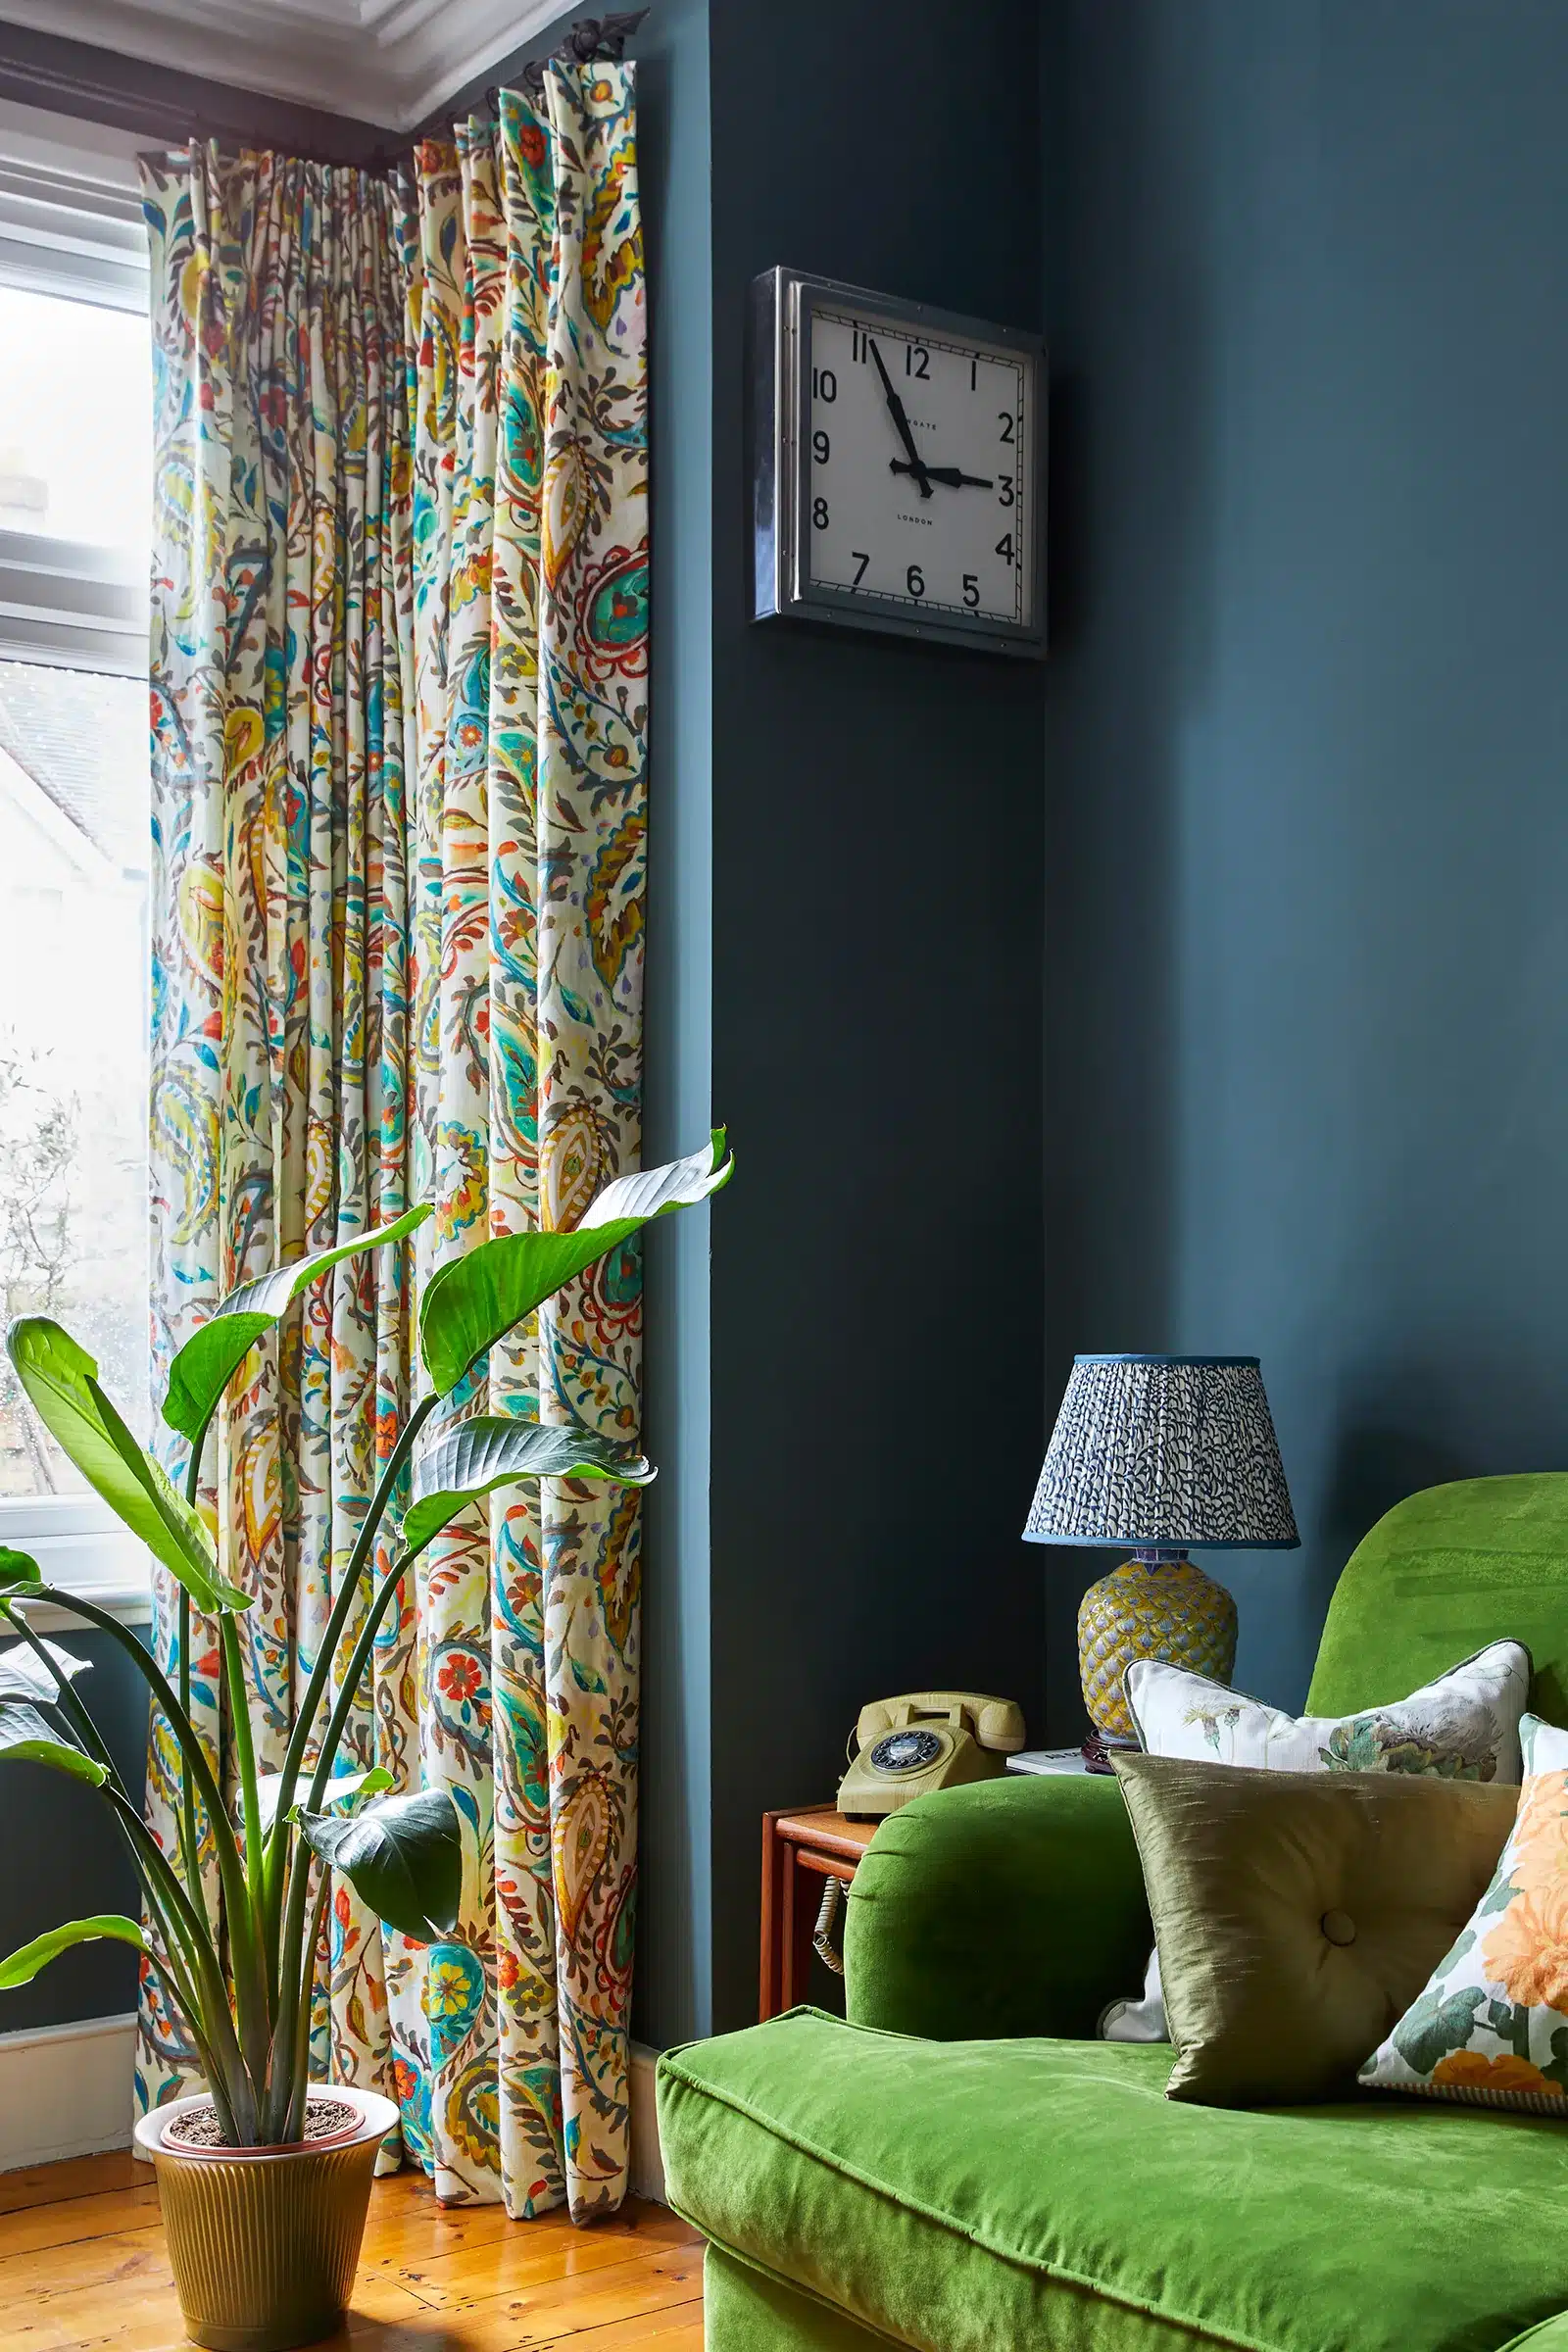 A living room with a green couch and made-to-measure colorful curtains.